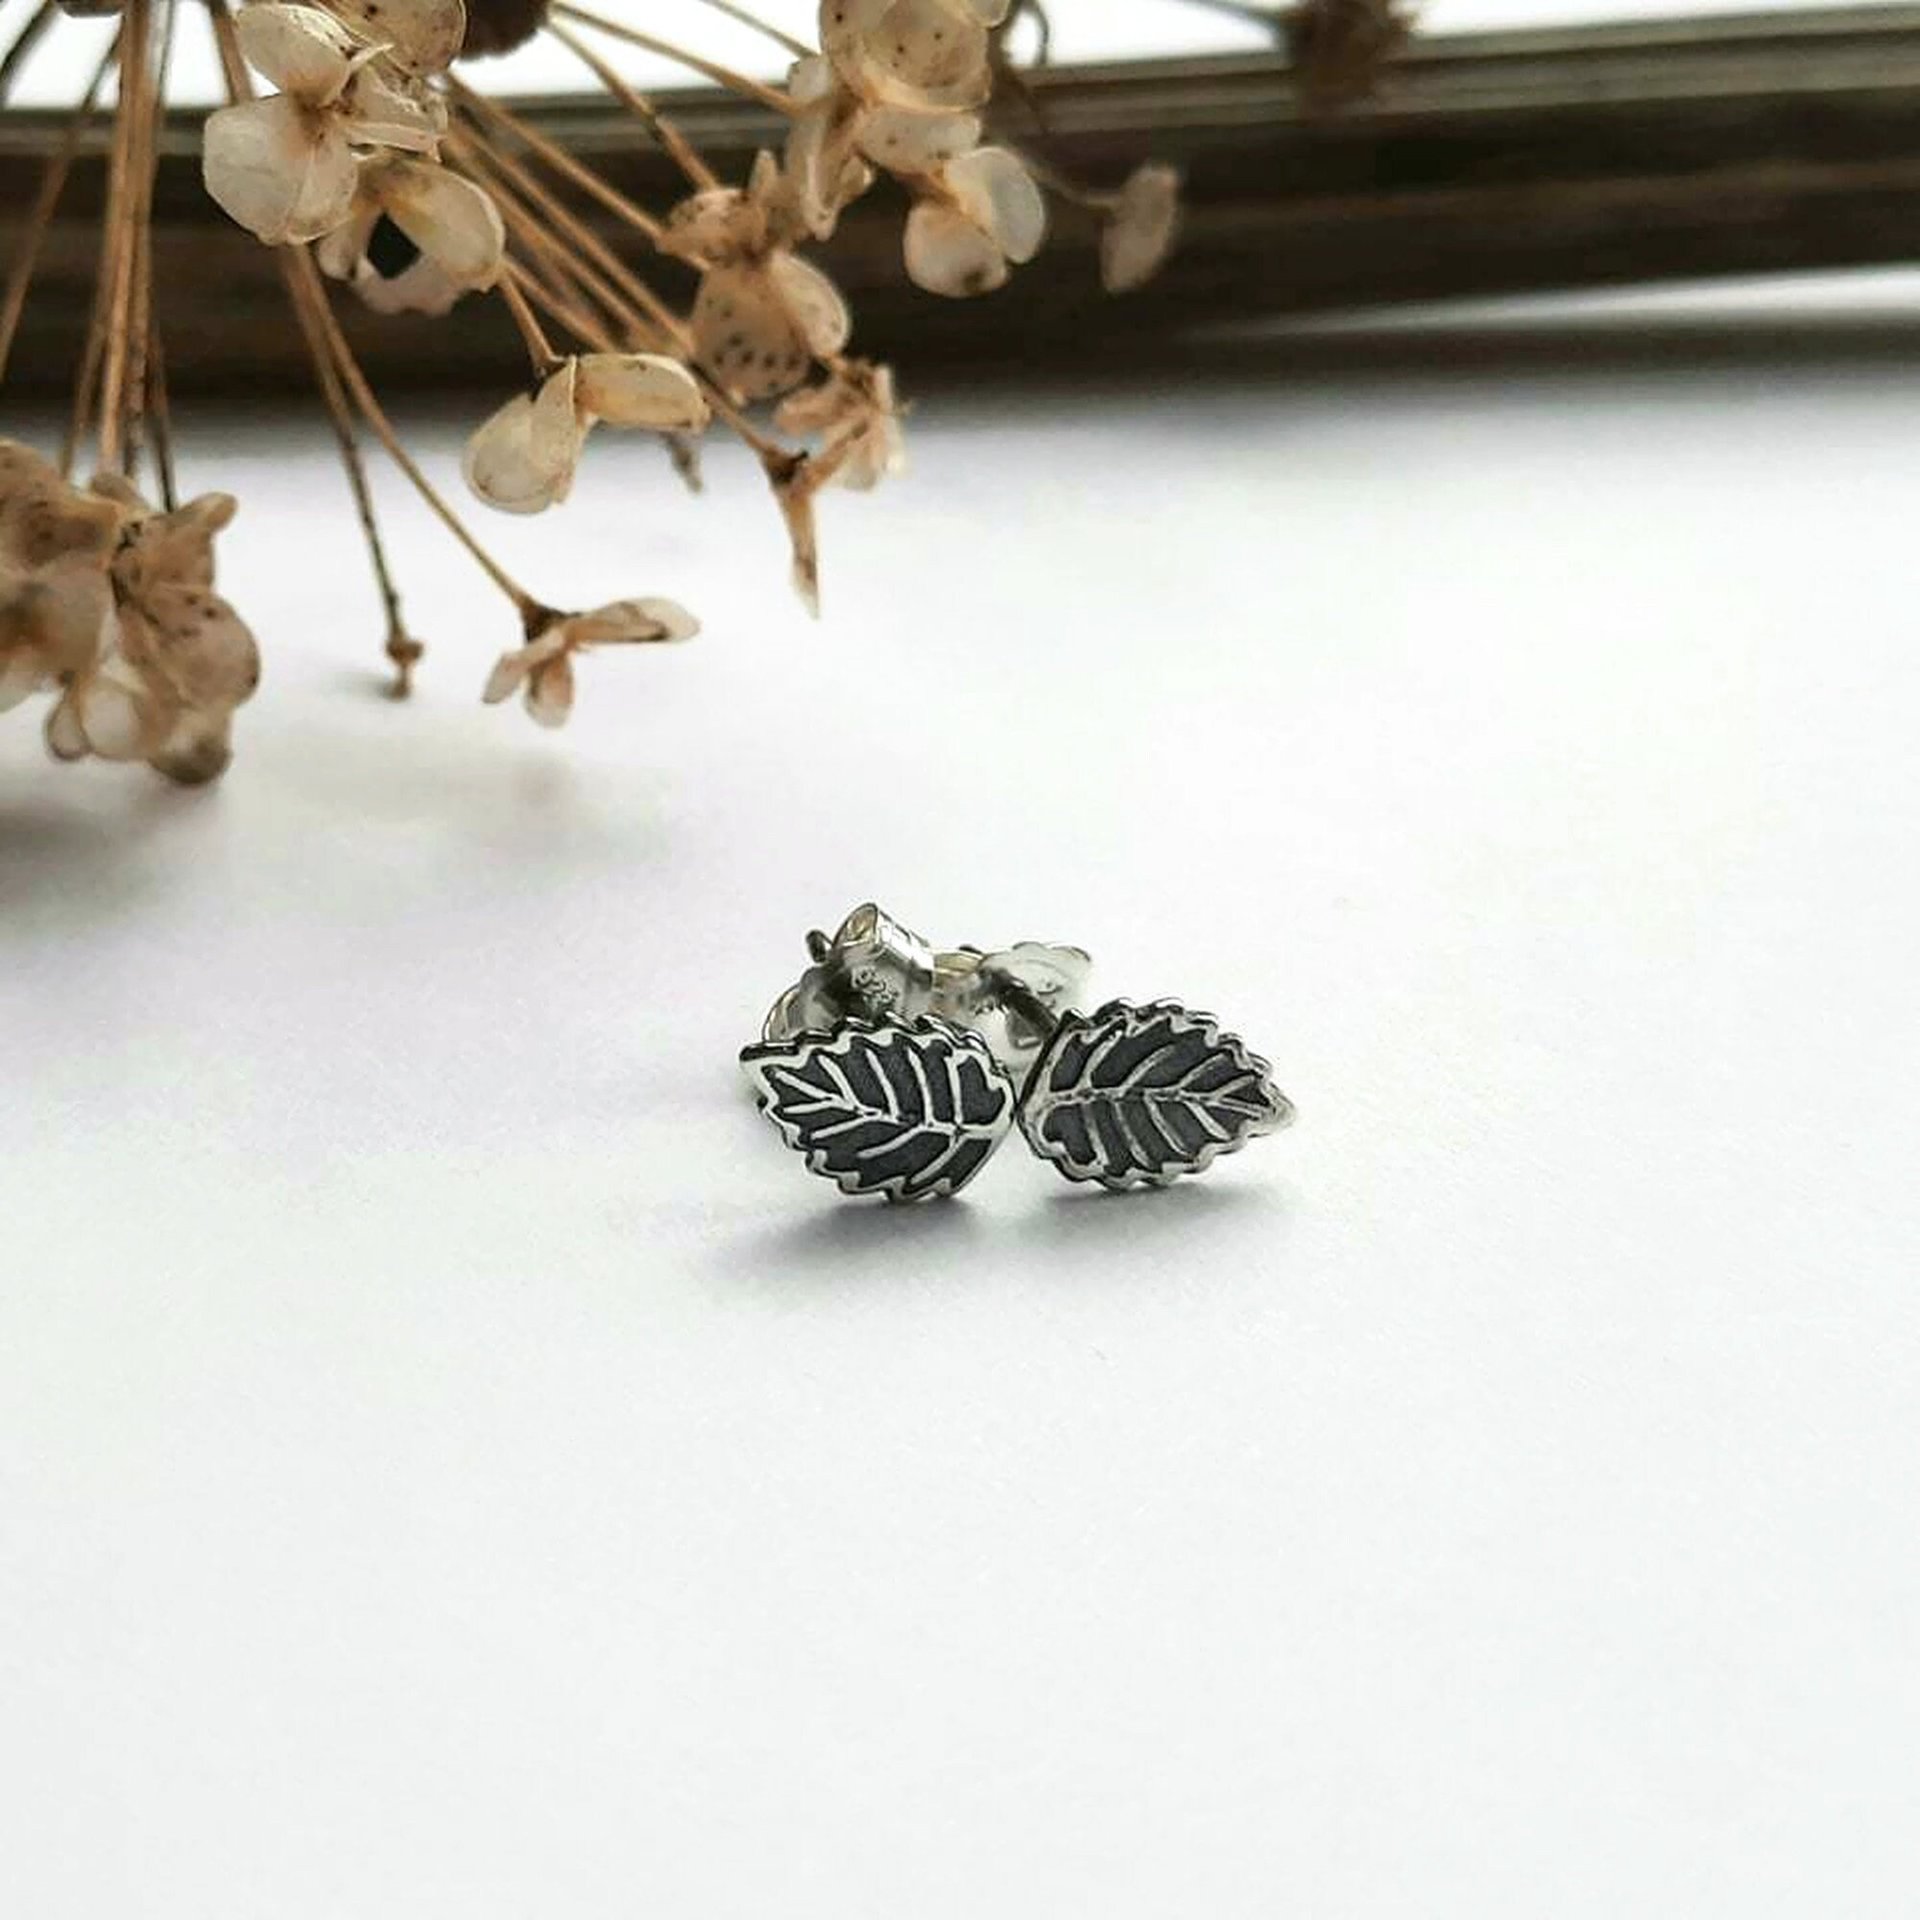 Oxidised Sterling Silver Leaf Earrings ~ Handmade by The Tiny Tree Frog Jewellery